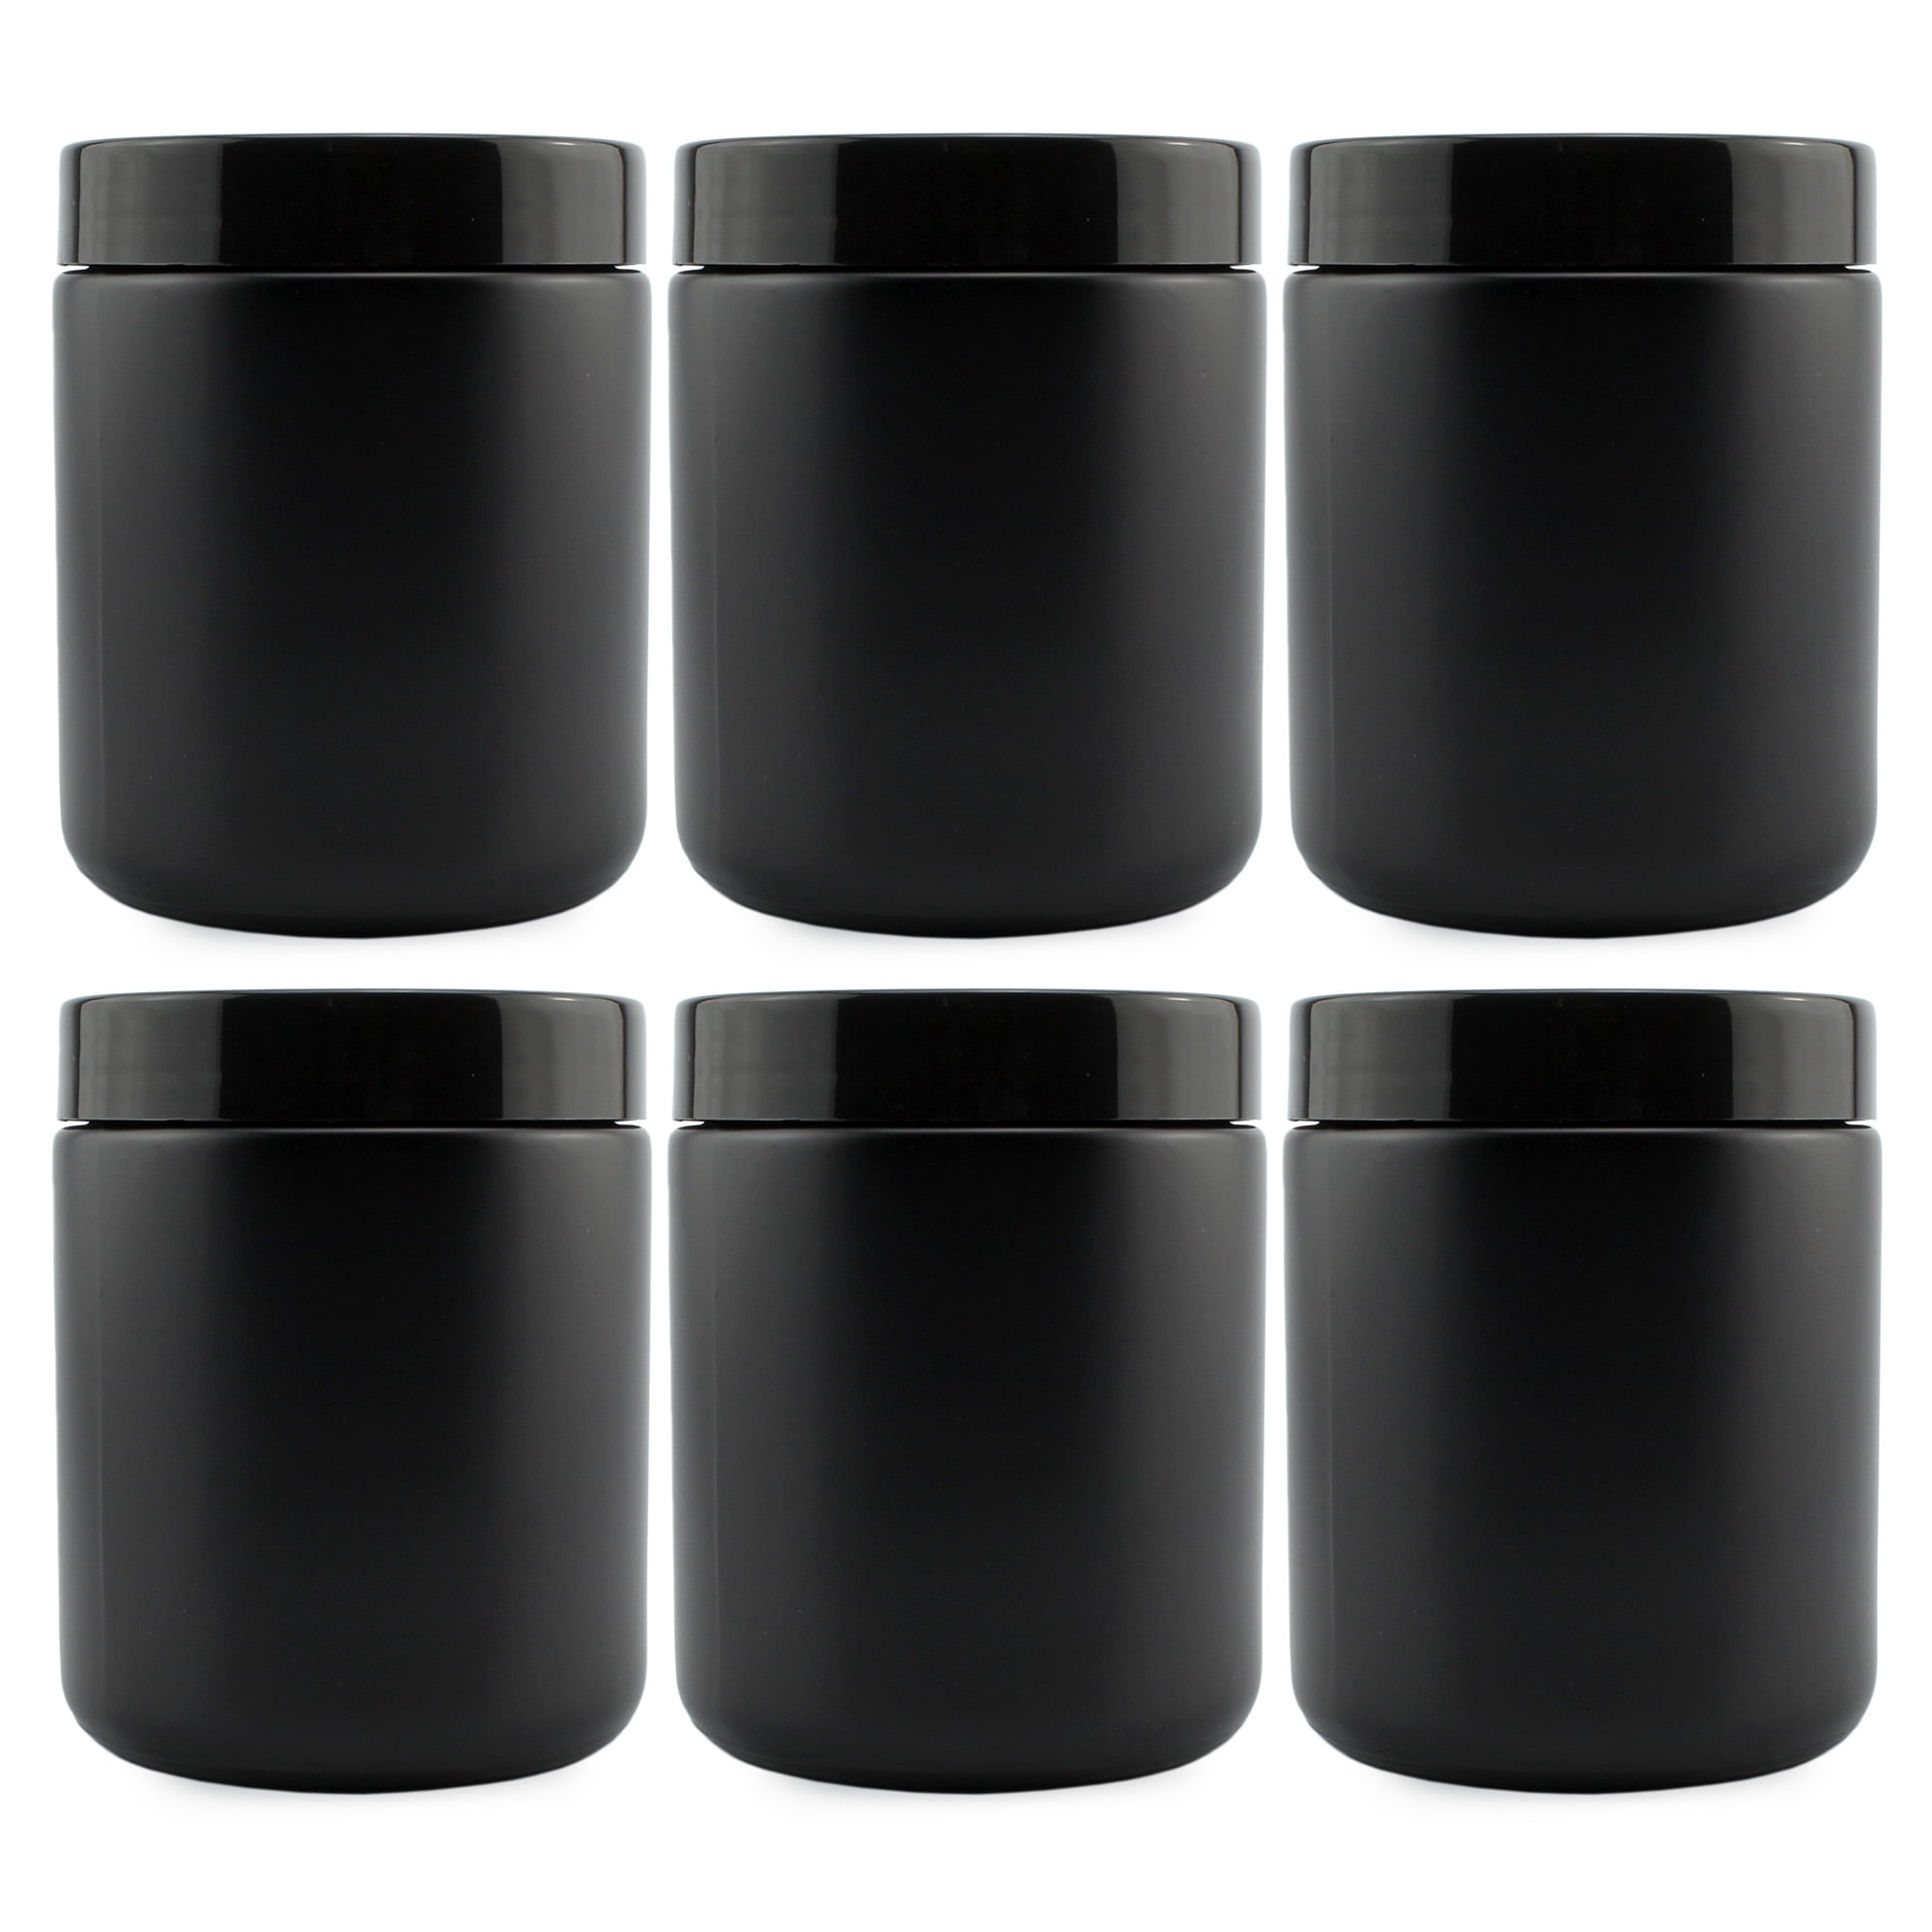 8oz Black Coated Glass Jars (6-Pack); Cosmetic with Black Plastic Lids and Black Matte Exterior, 8-Ounce / Capacity Walmart.com